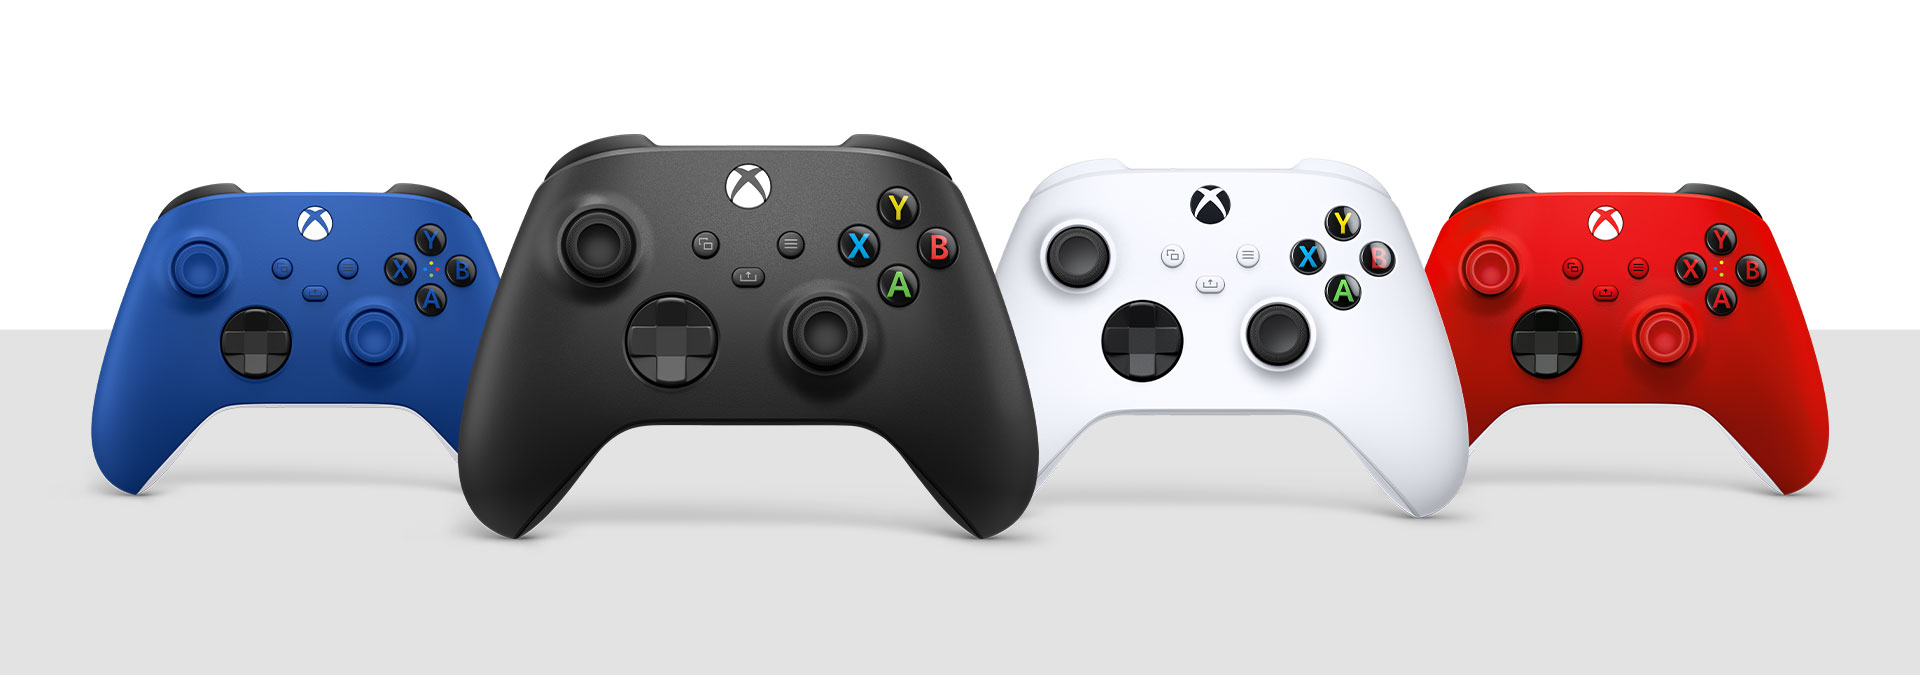 Xbox Wireless Controller Carbon Black, Robot White, Shock Blue, and Pulse Red